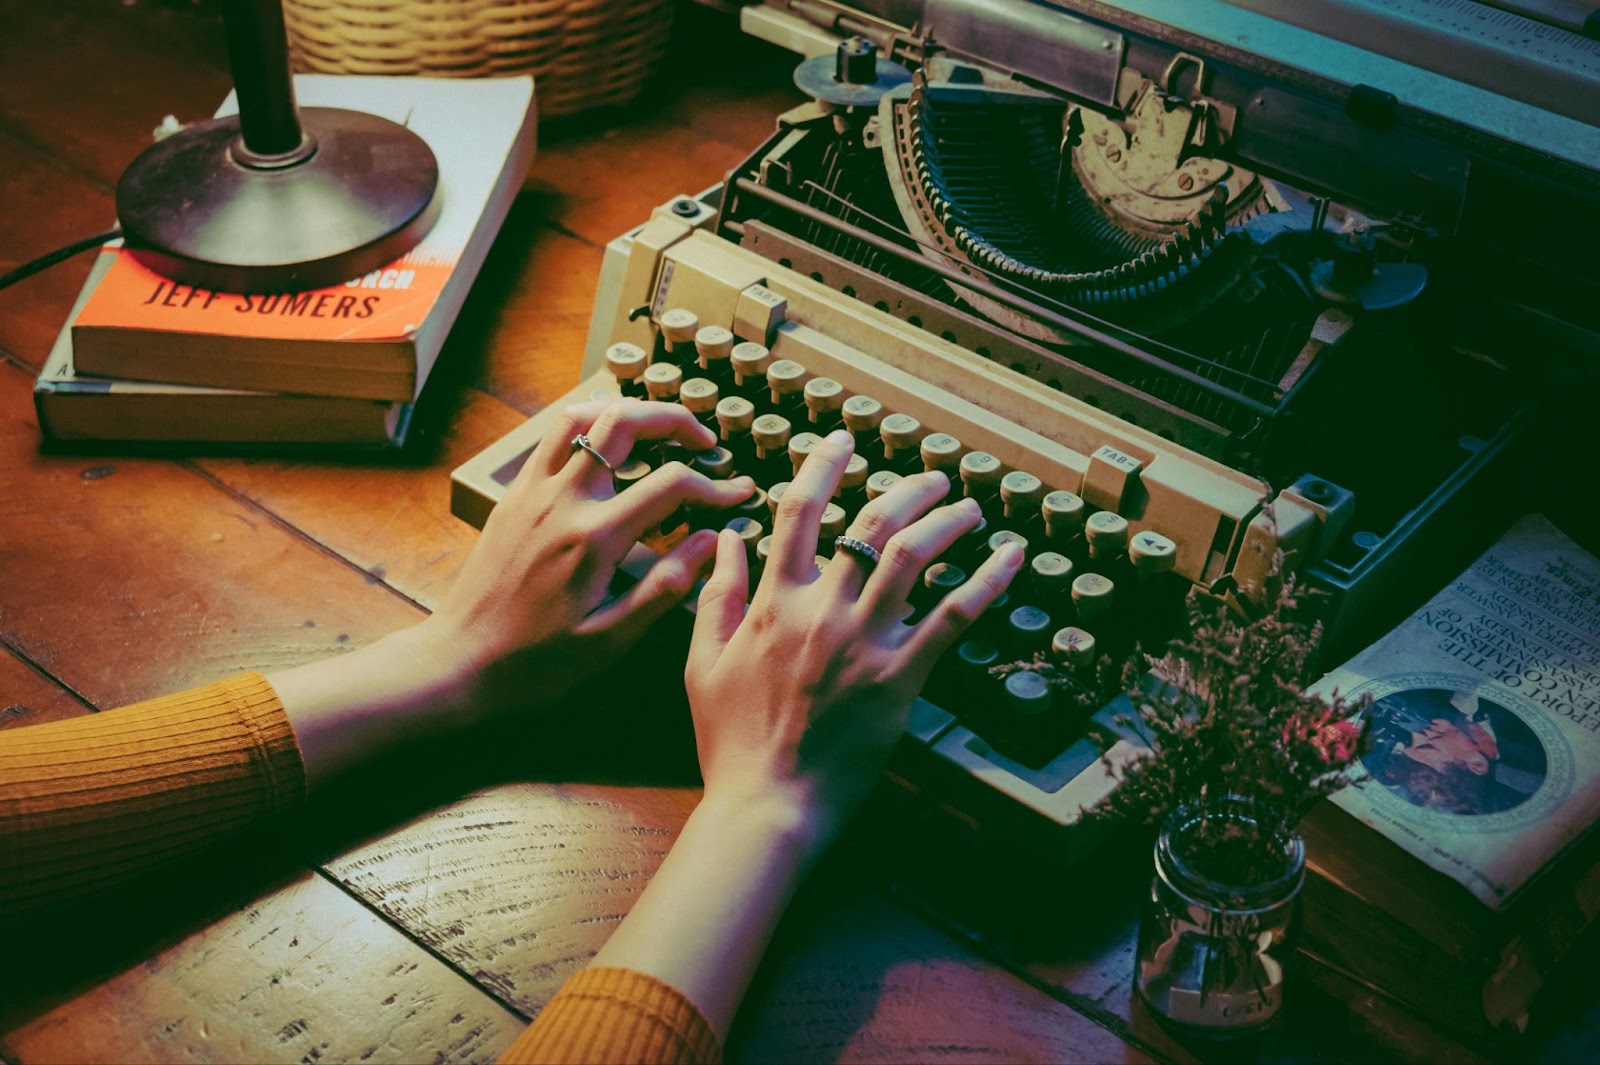 A woman’s hands typing on an old typewriter machine